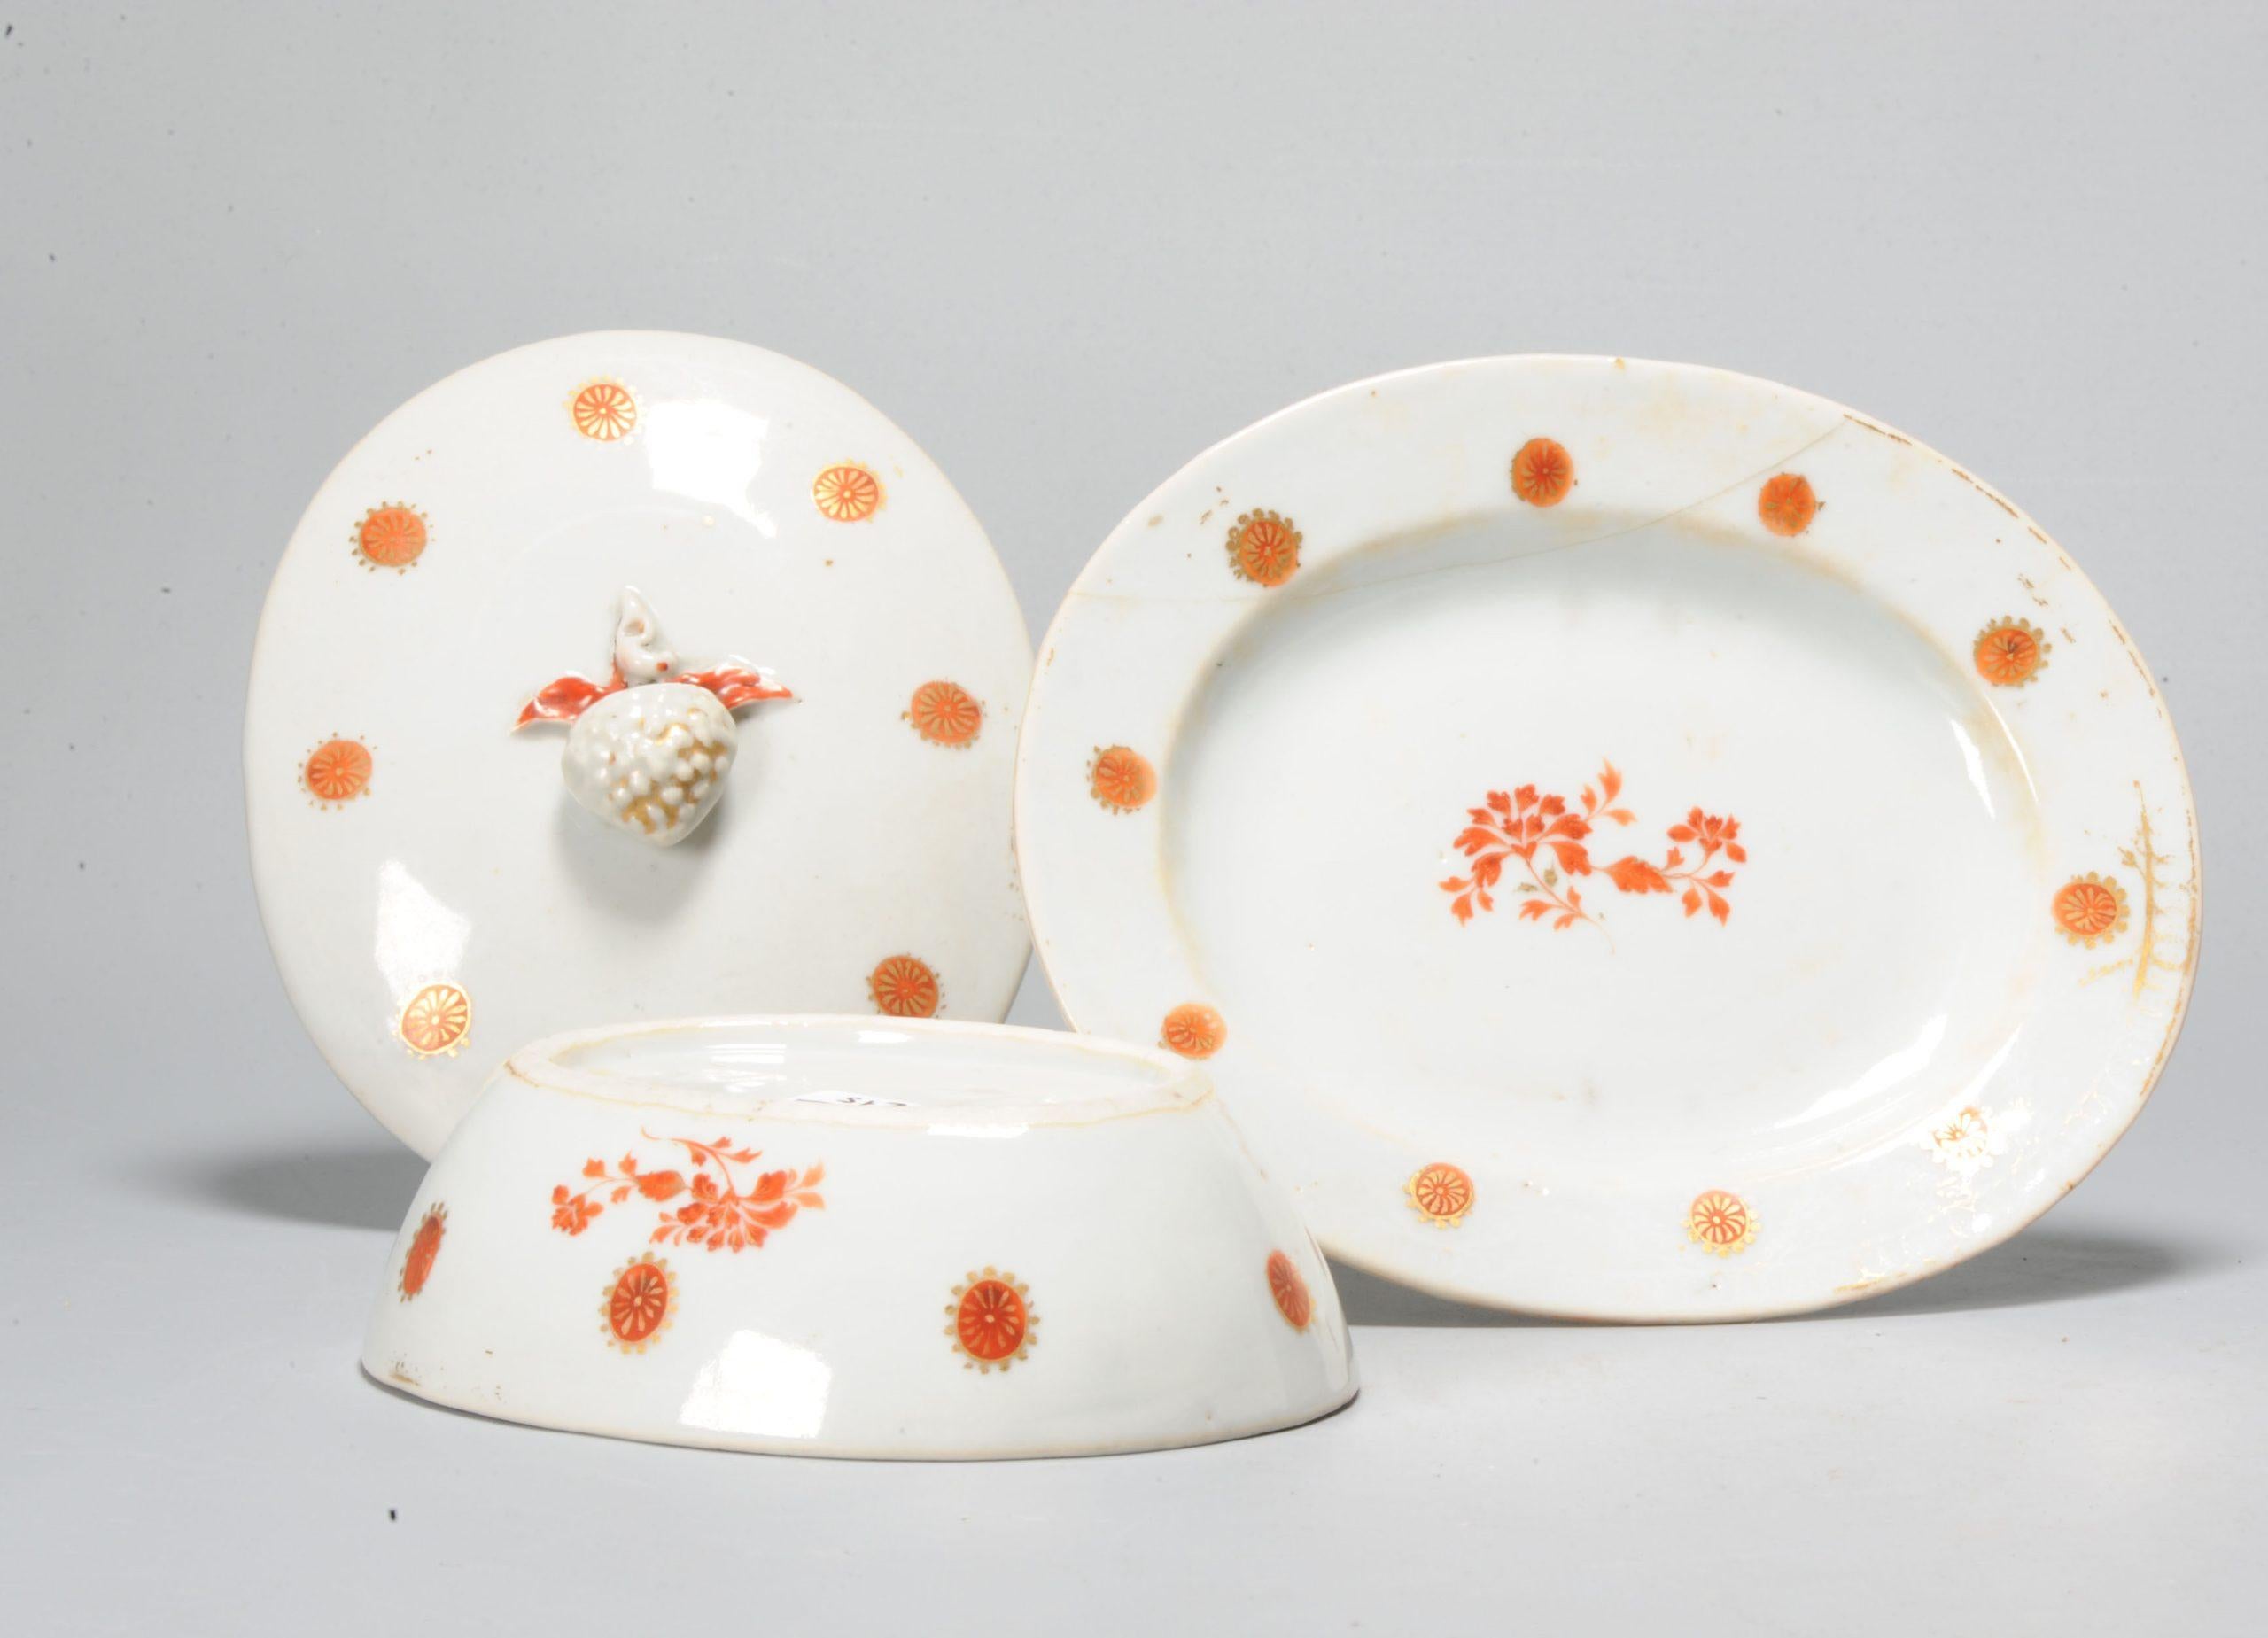 Qianlong, 18th century, Rouge de fer 1750-1770
Unusual and very delicate decoration.

Additional information:
Material: Porcelain & Pottery
Region of Origin: China
Period: 18th century Qing (1661 - 1912)
Age: Pre-1800
Condition: Dish with restuck